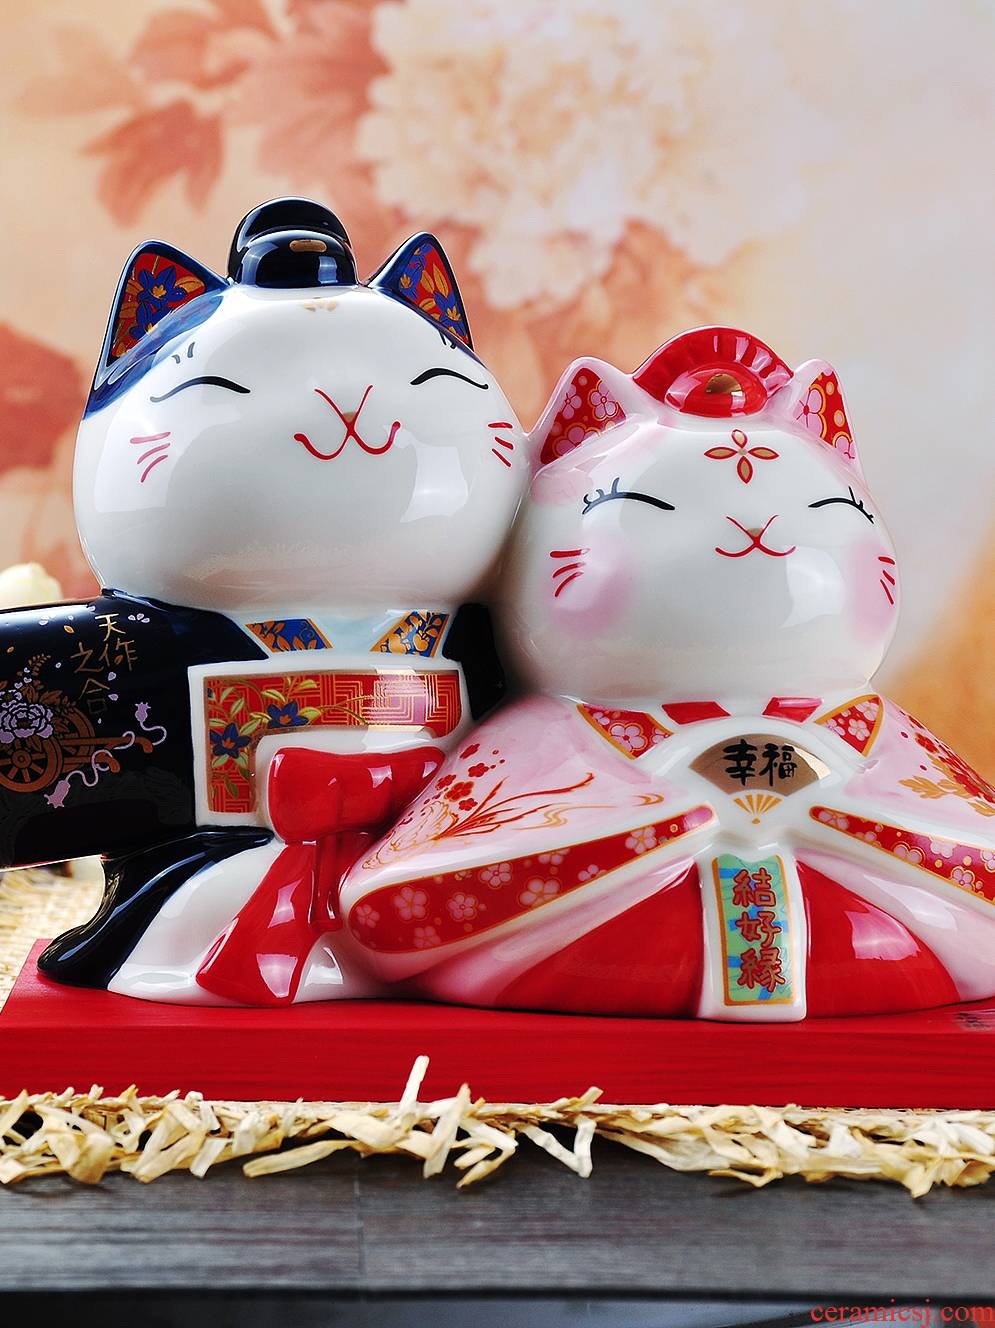 Valentine 's day gift marriage room adornment is placed lovely ceramic plutus cat piggy bank girlfriends friend wedding gift